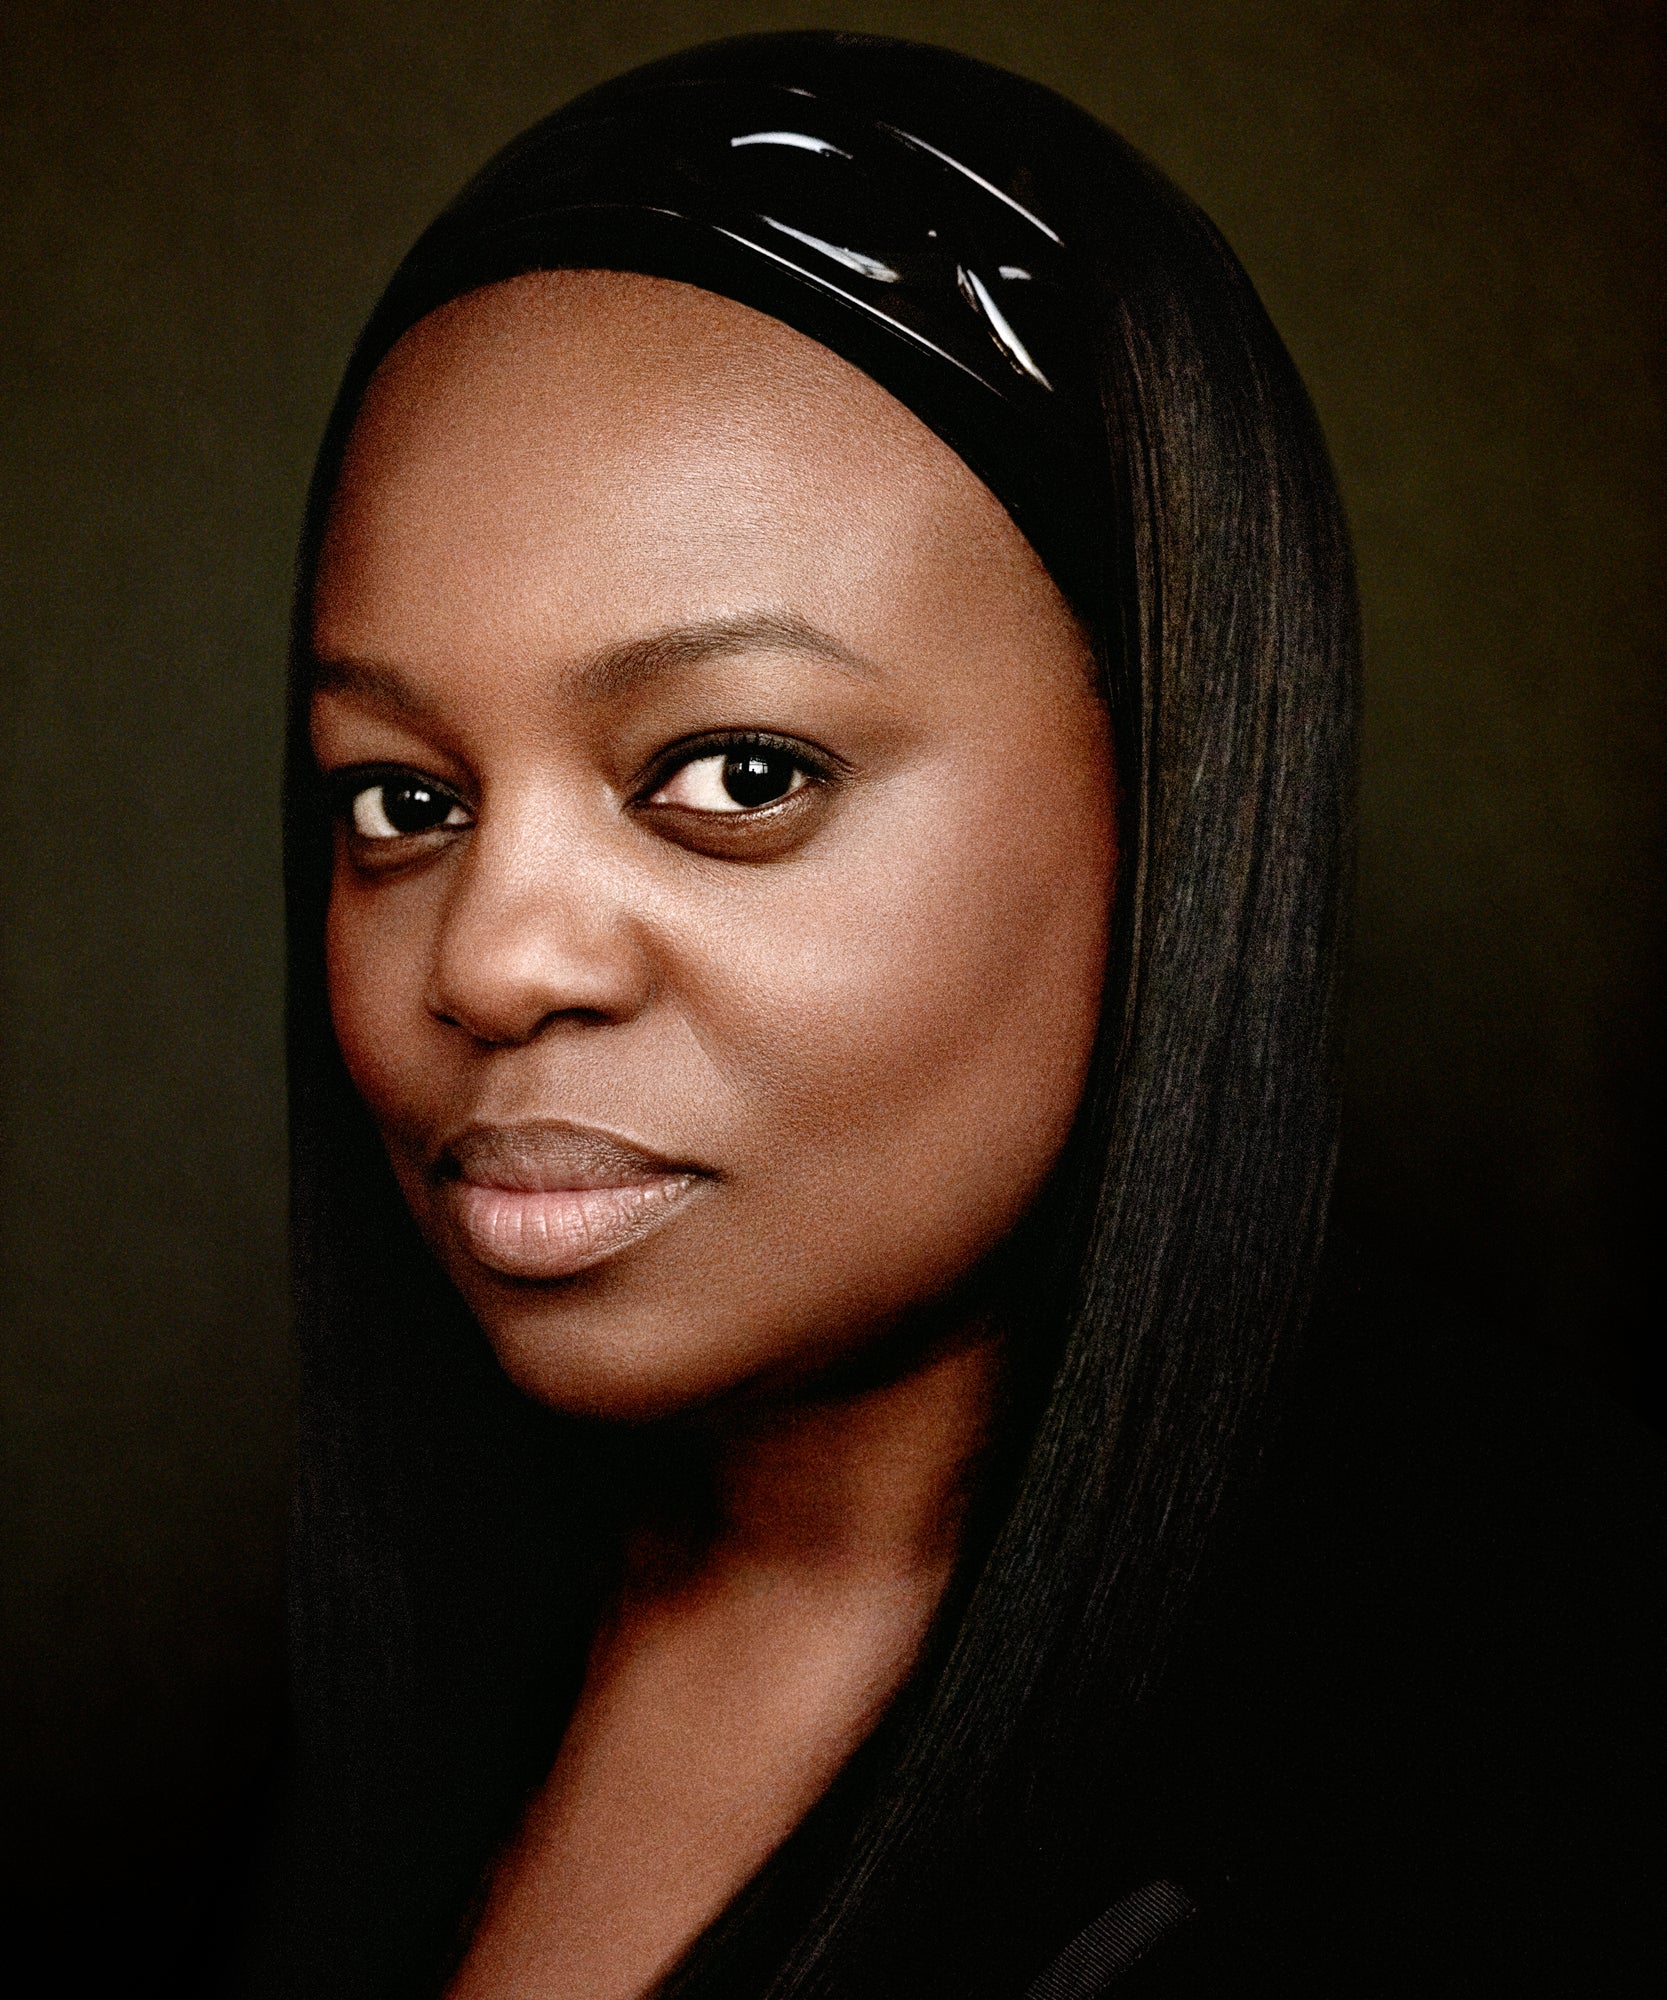 Pat McGrath’s First 'Unlimited' Makeup Line Launches Very Soon
